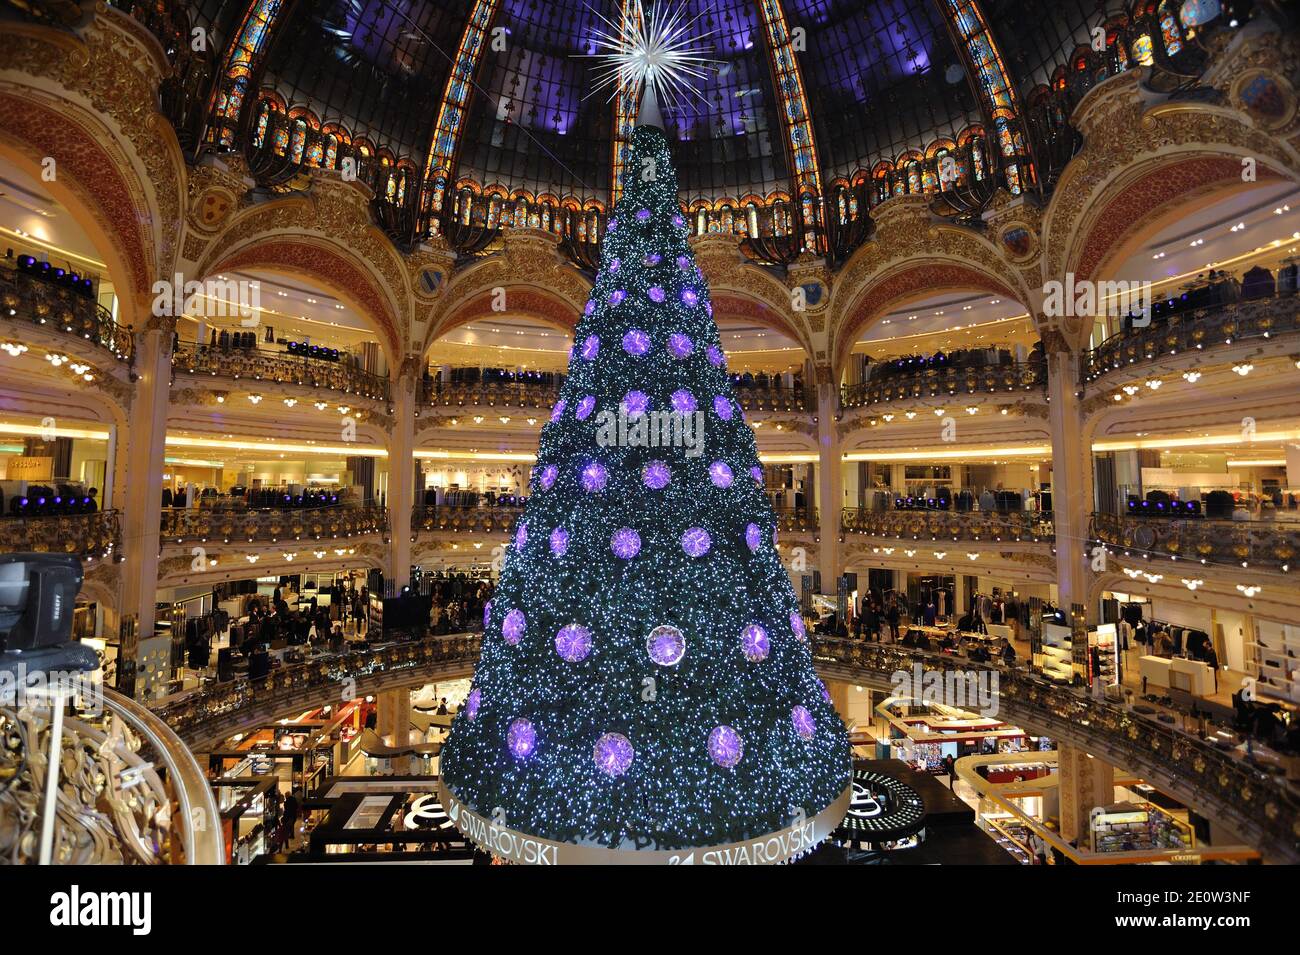 A Swarovski Christmas tree is seen at Galeries Lafayette department store  in Paris, France on November 6, 2012.. The store inaugurated the  illuminations and animated shop windows in preparation for Christmas and